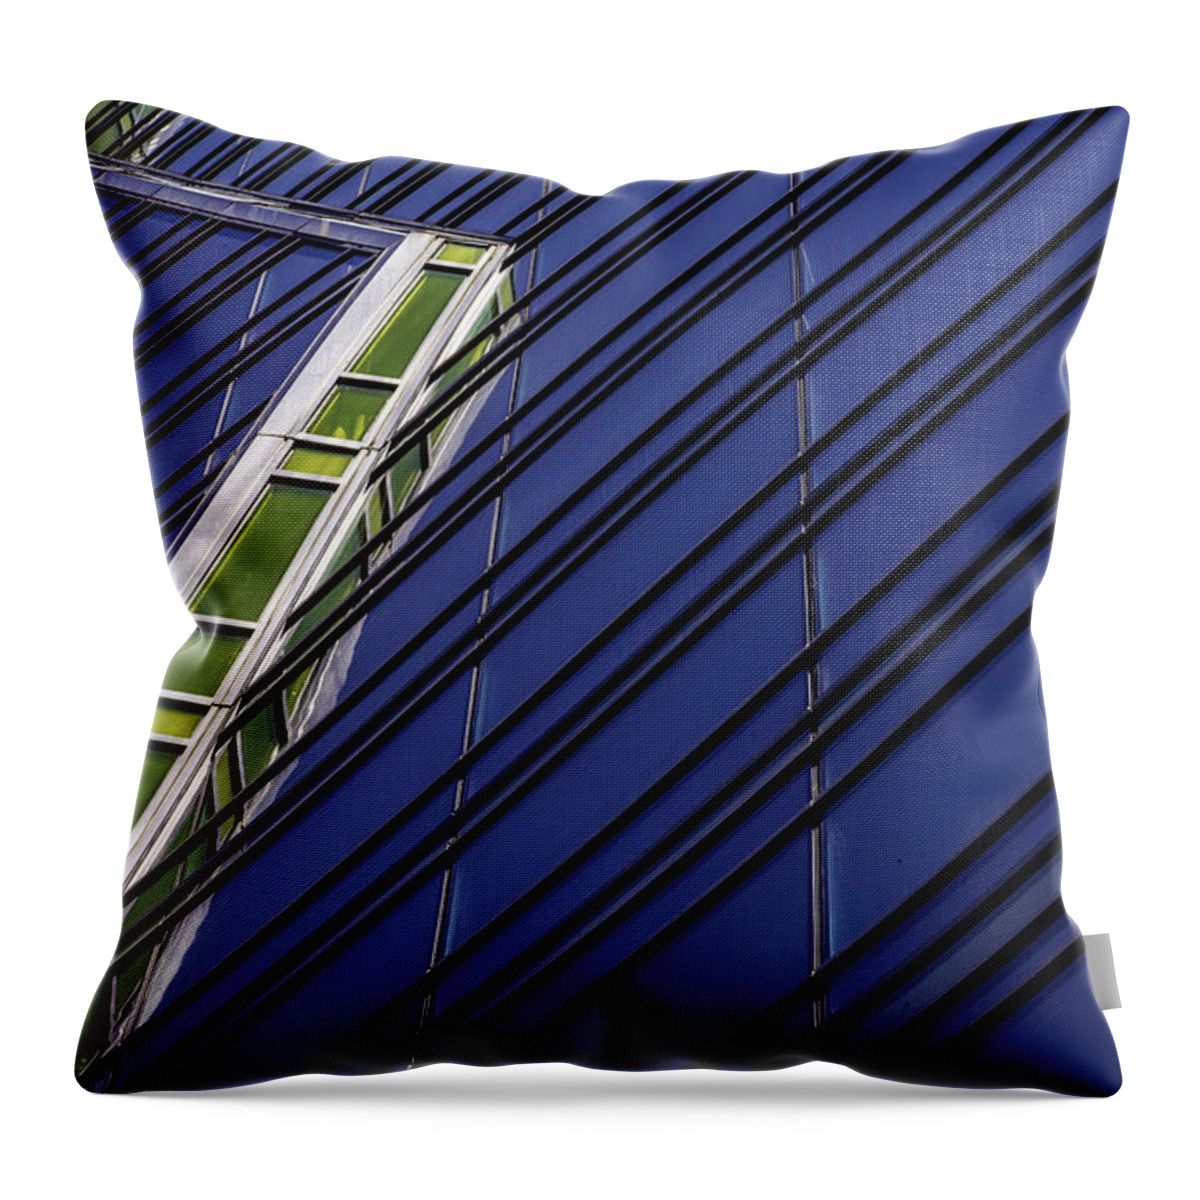  Throw Pillow featuring the photograph The Wit Series One by Raymond Kunst